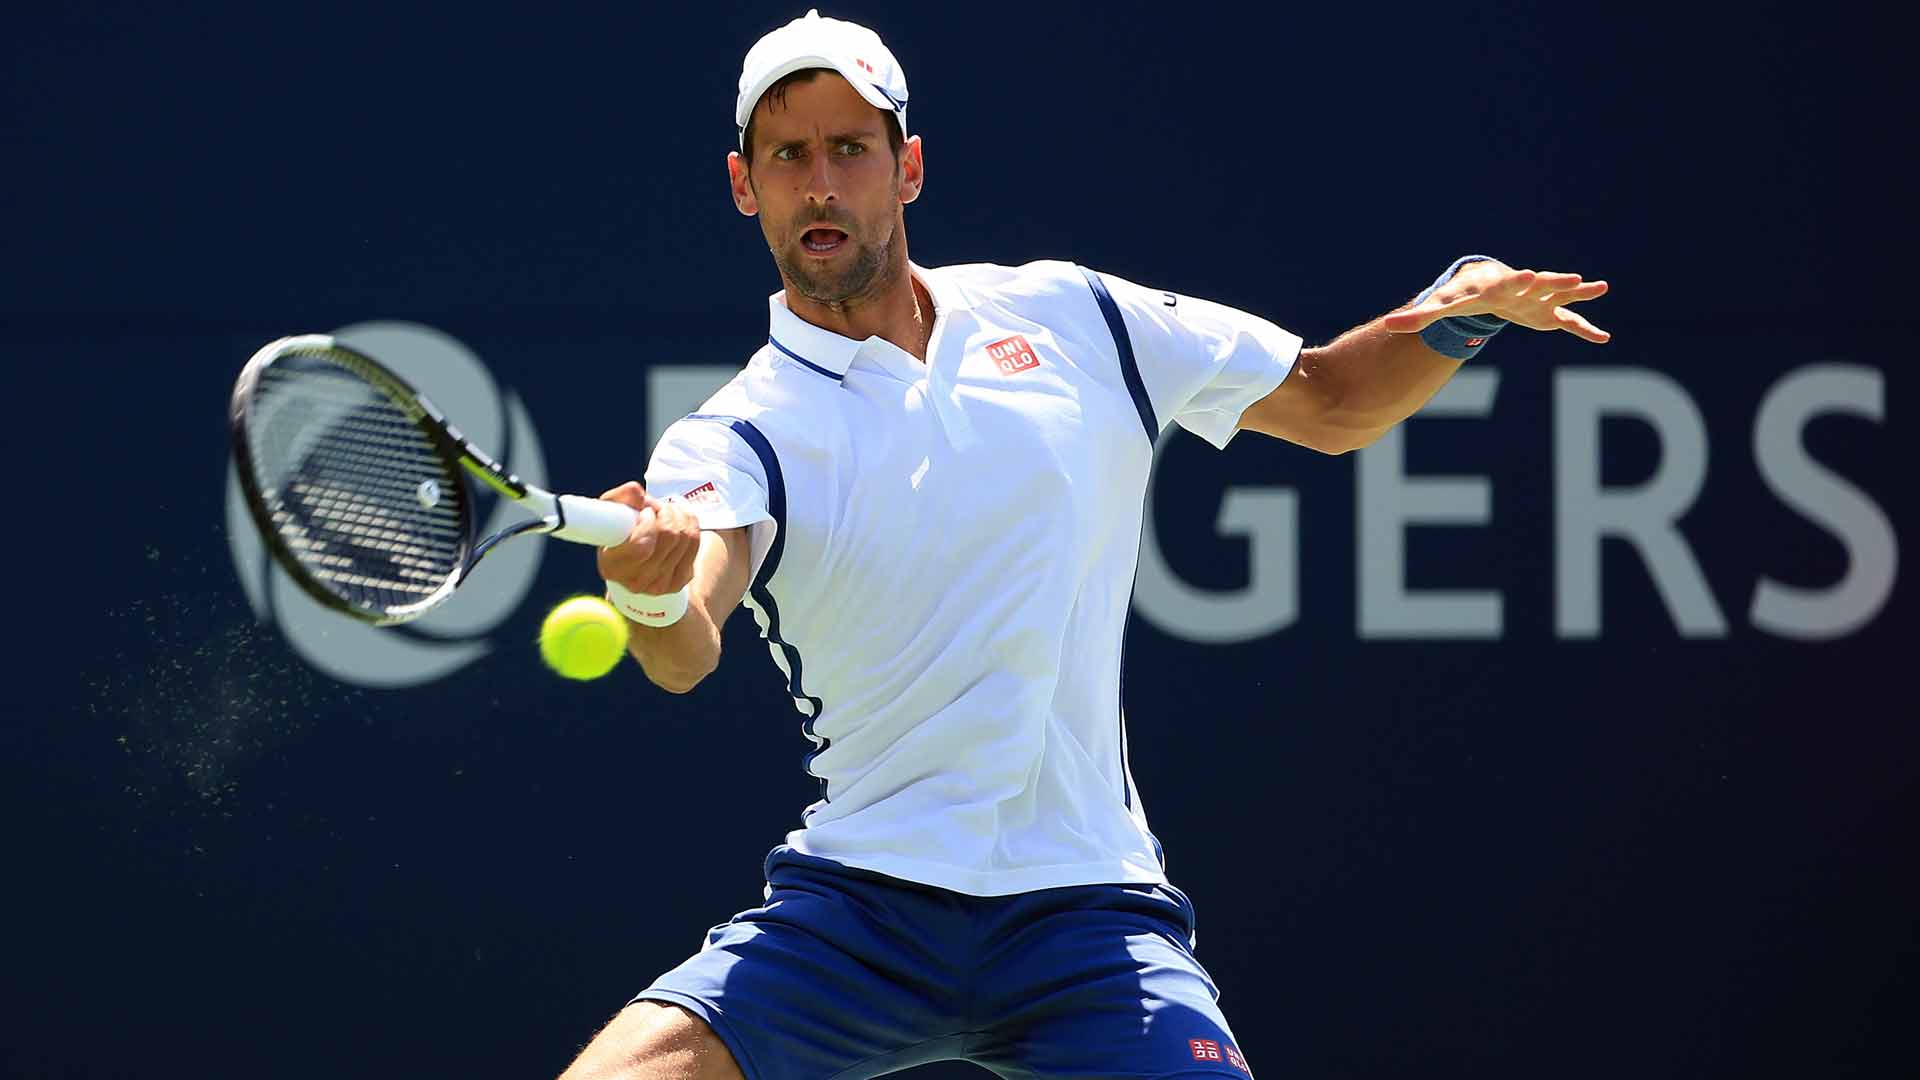 Novak Djokovic has remained one of the elite players on the ATP World Tour for nearly a decade.